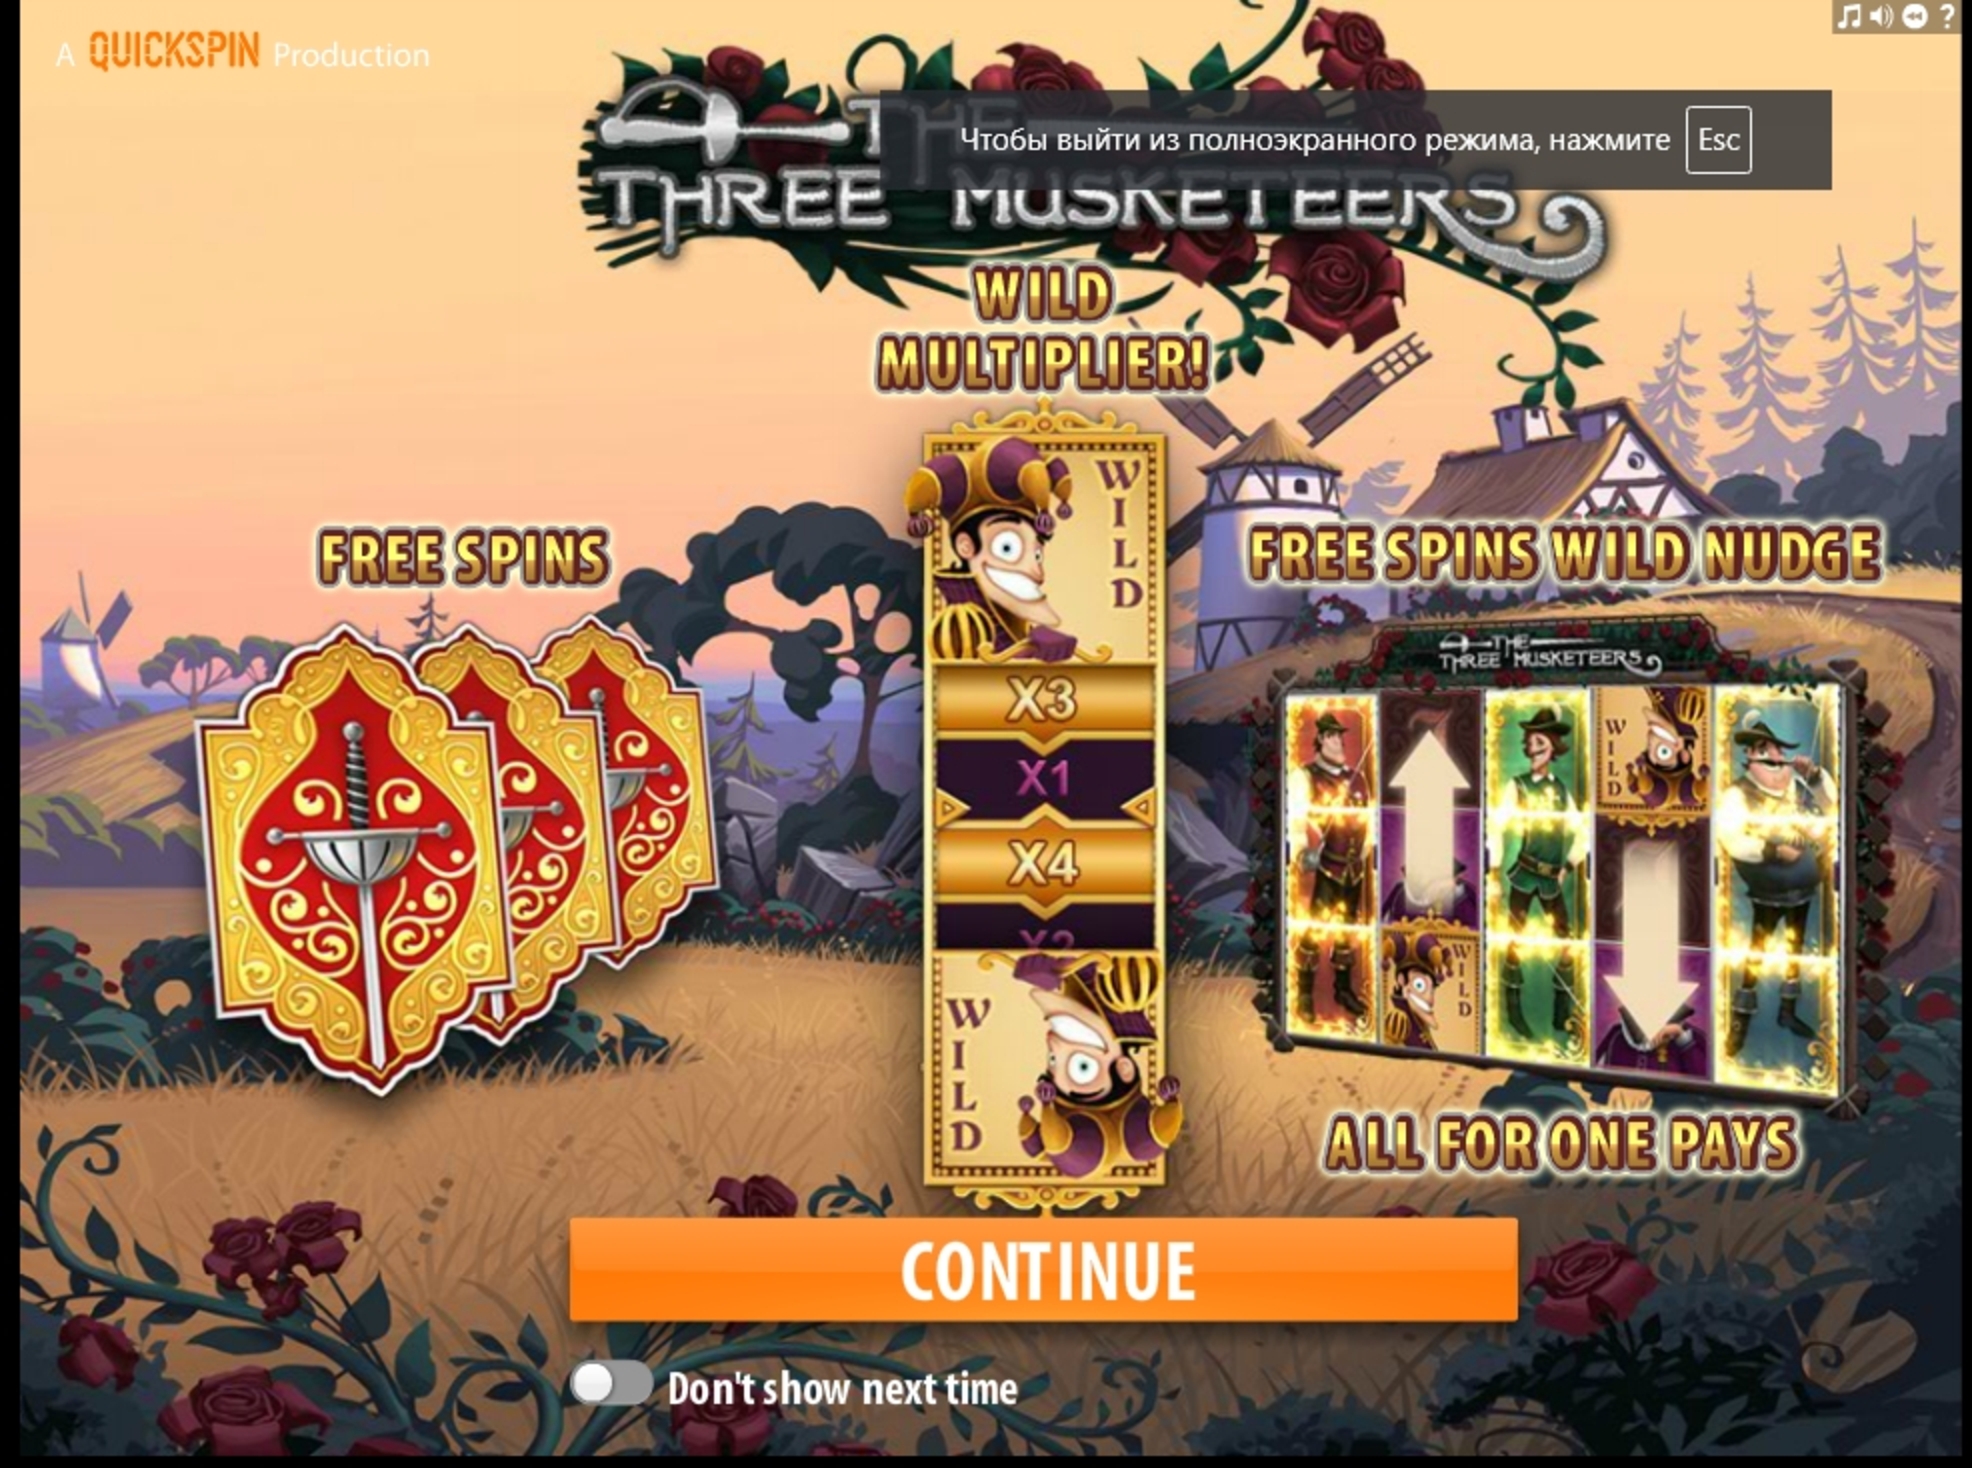 Play The Three Musketeers Free Casino Slot Game by Quickspin